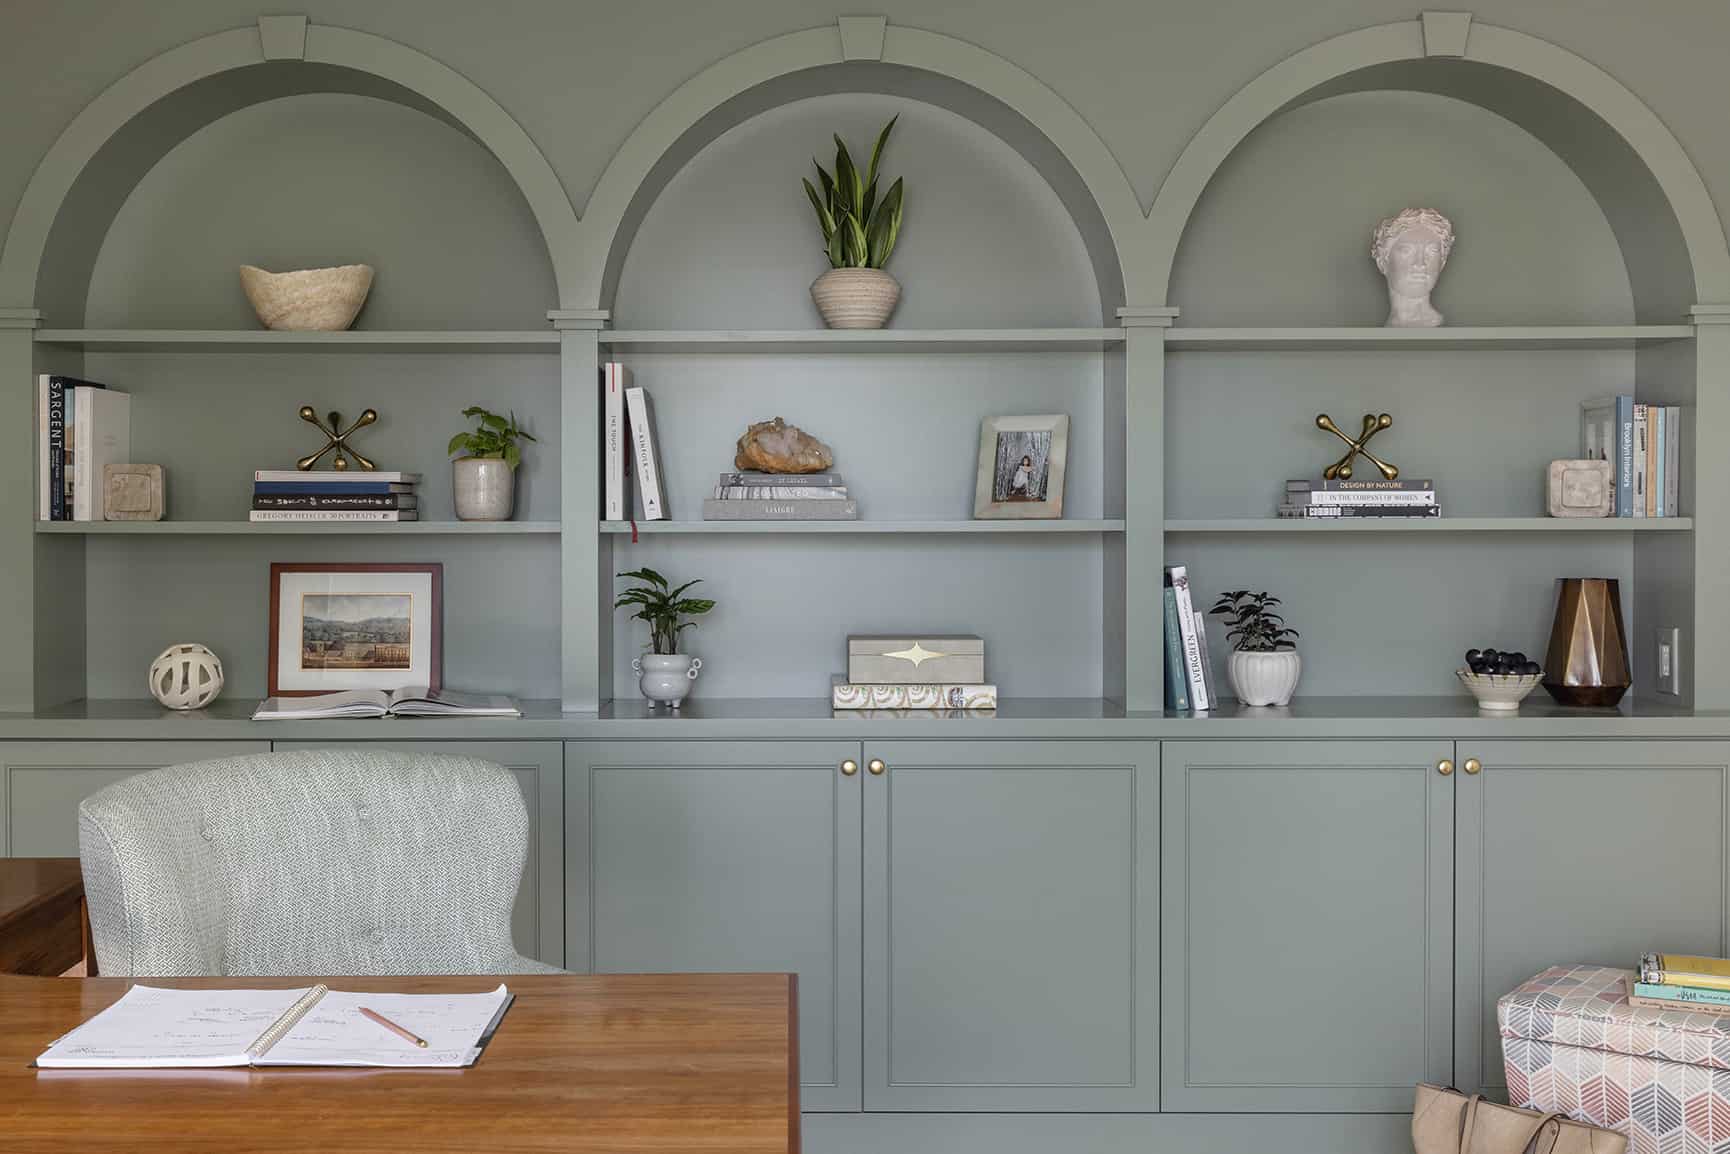 Beautifully crafted built-in arched cabinets.